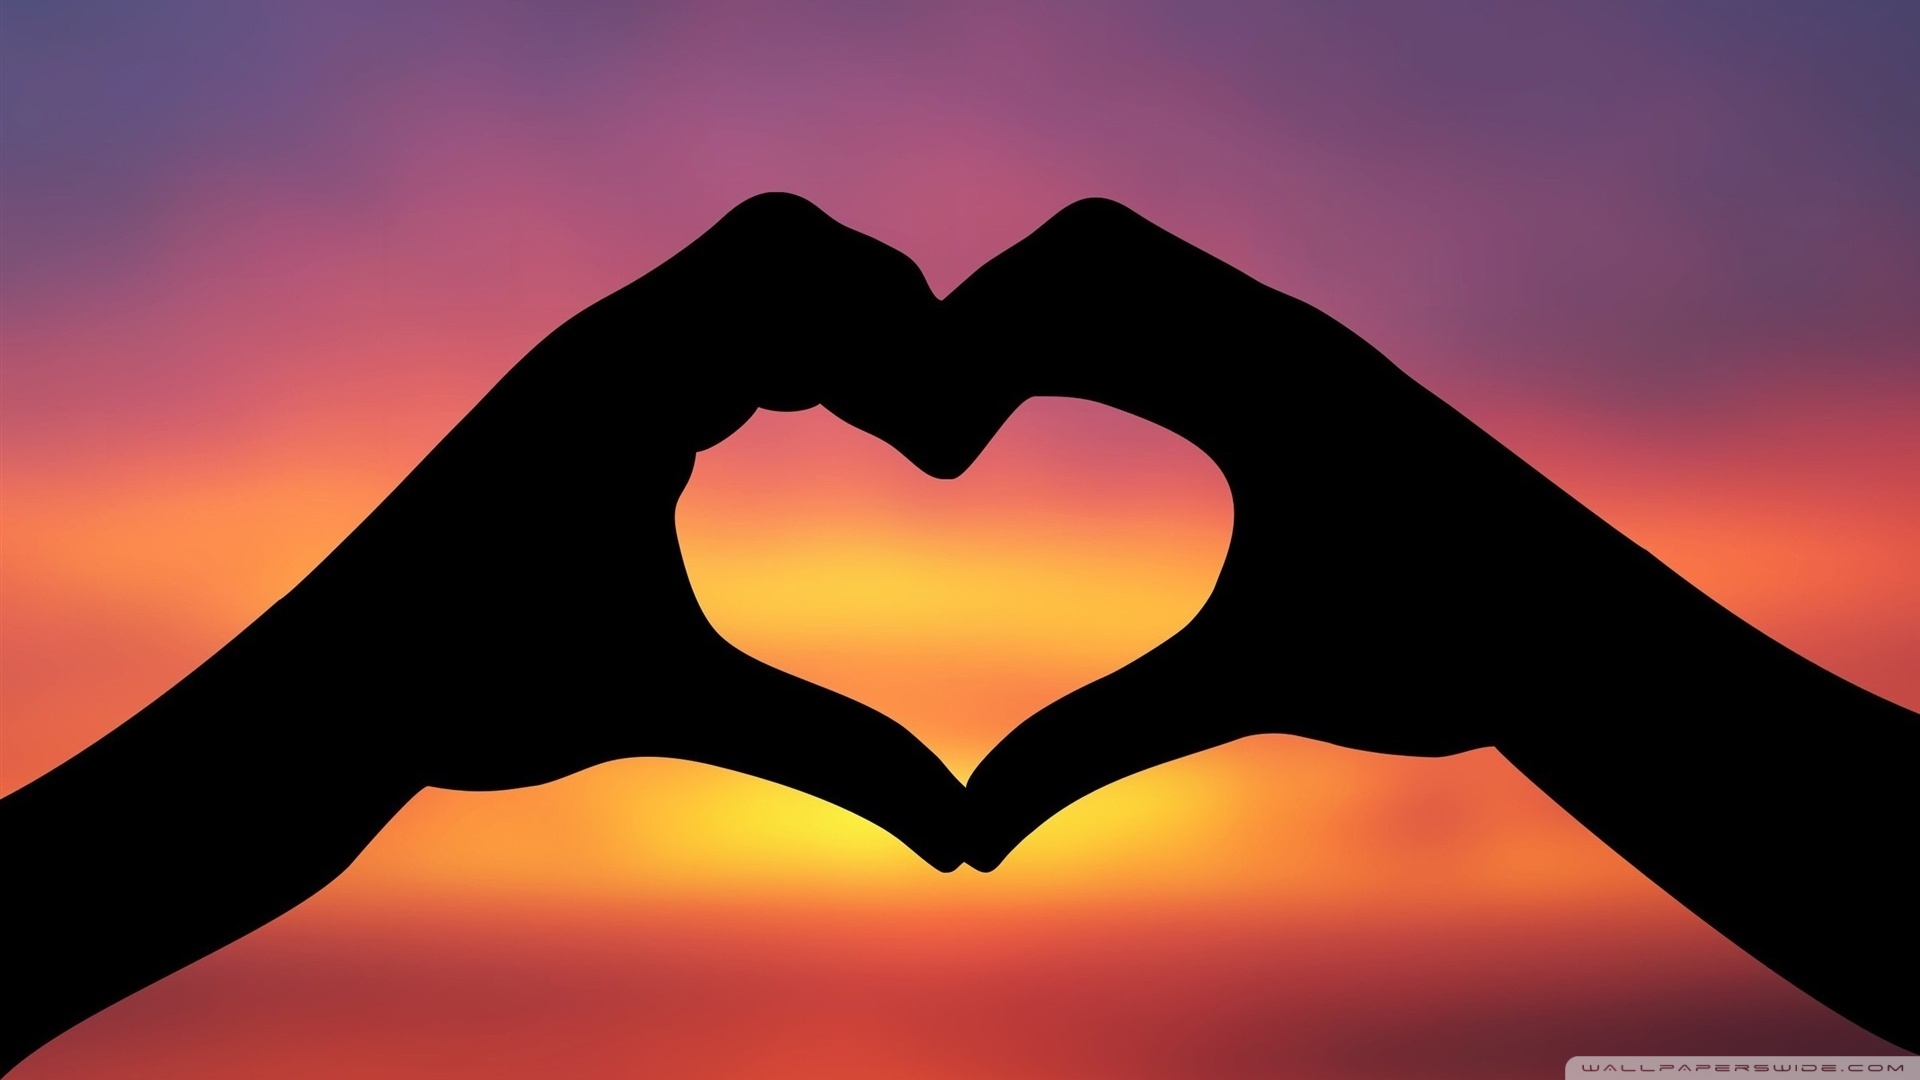 Hands Making A Heart In The Sunset Wallpaper